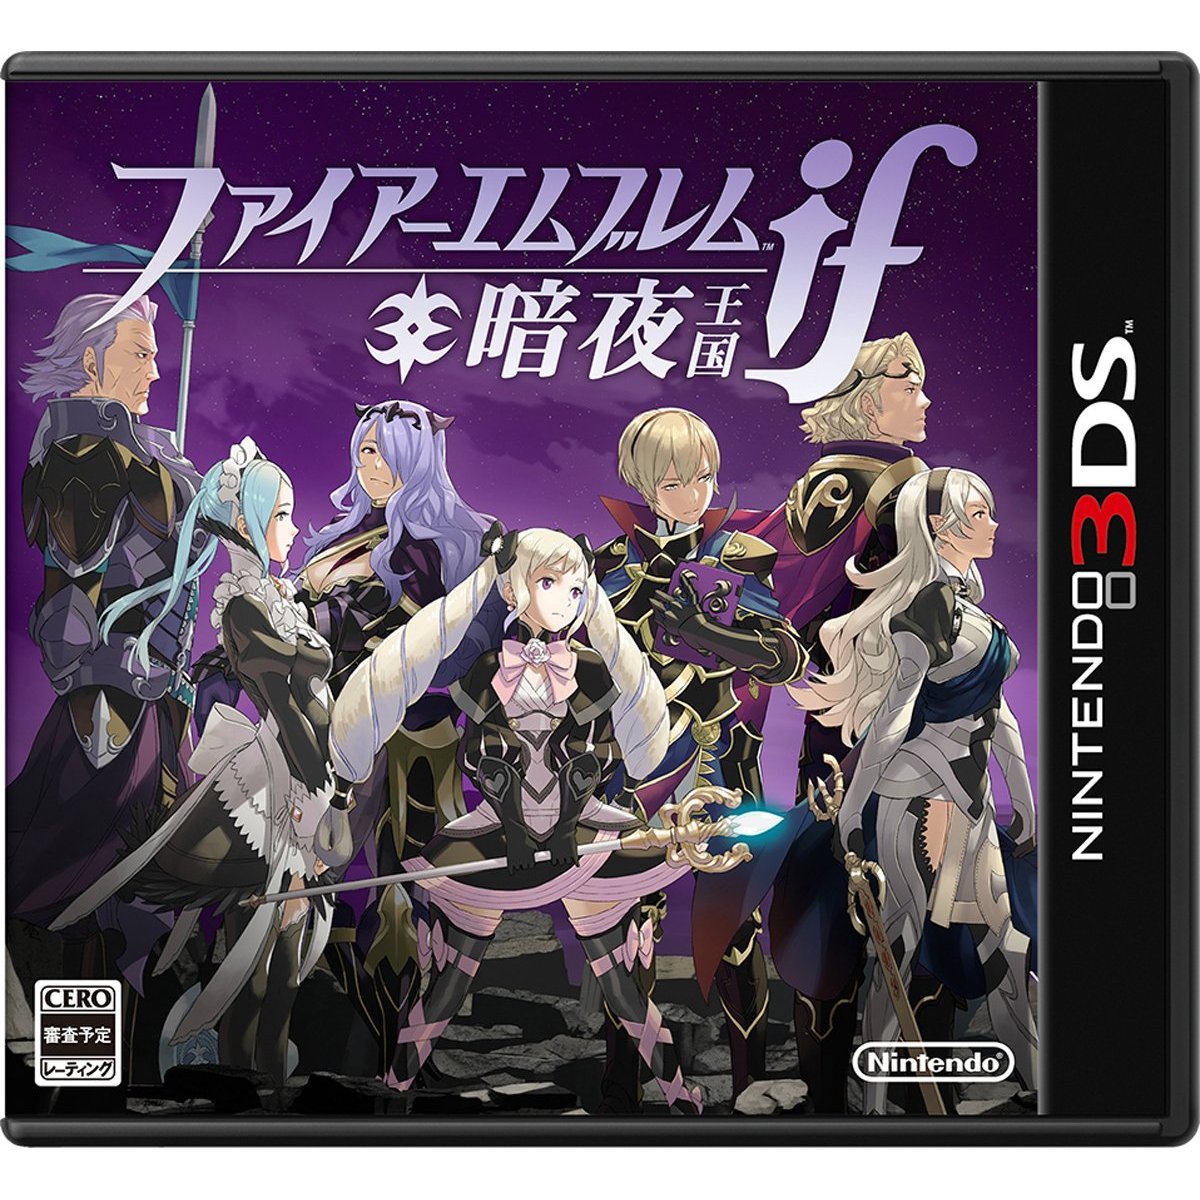 Fire Emblem Fates? Same-sex marriage? Disgusting!